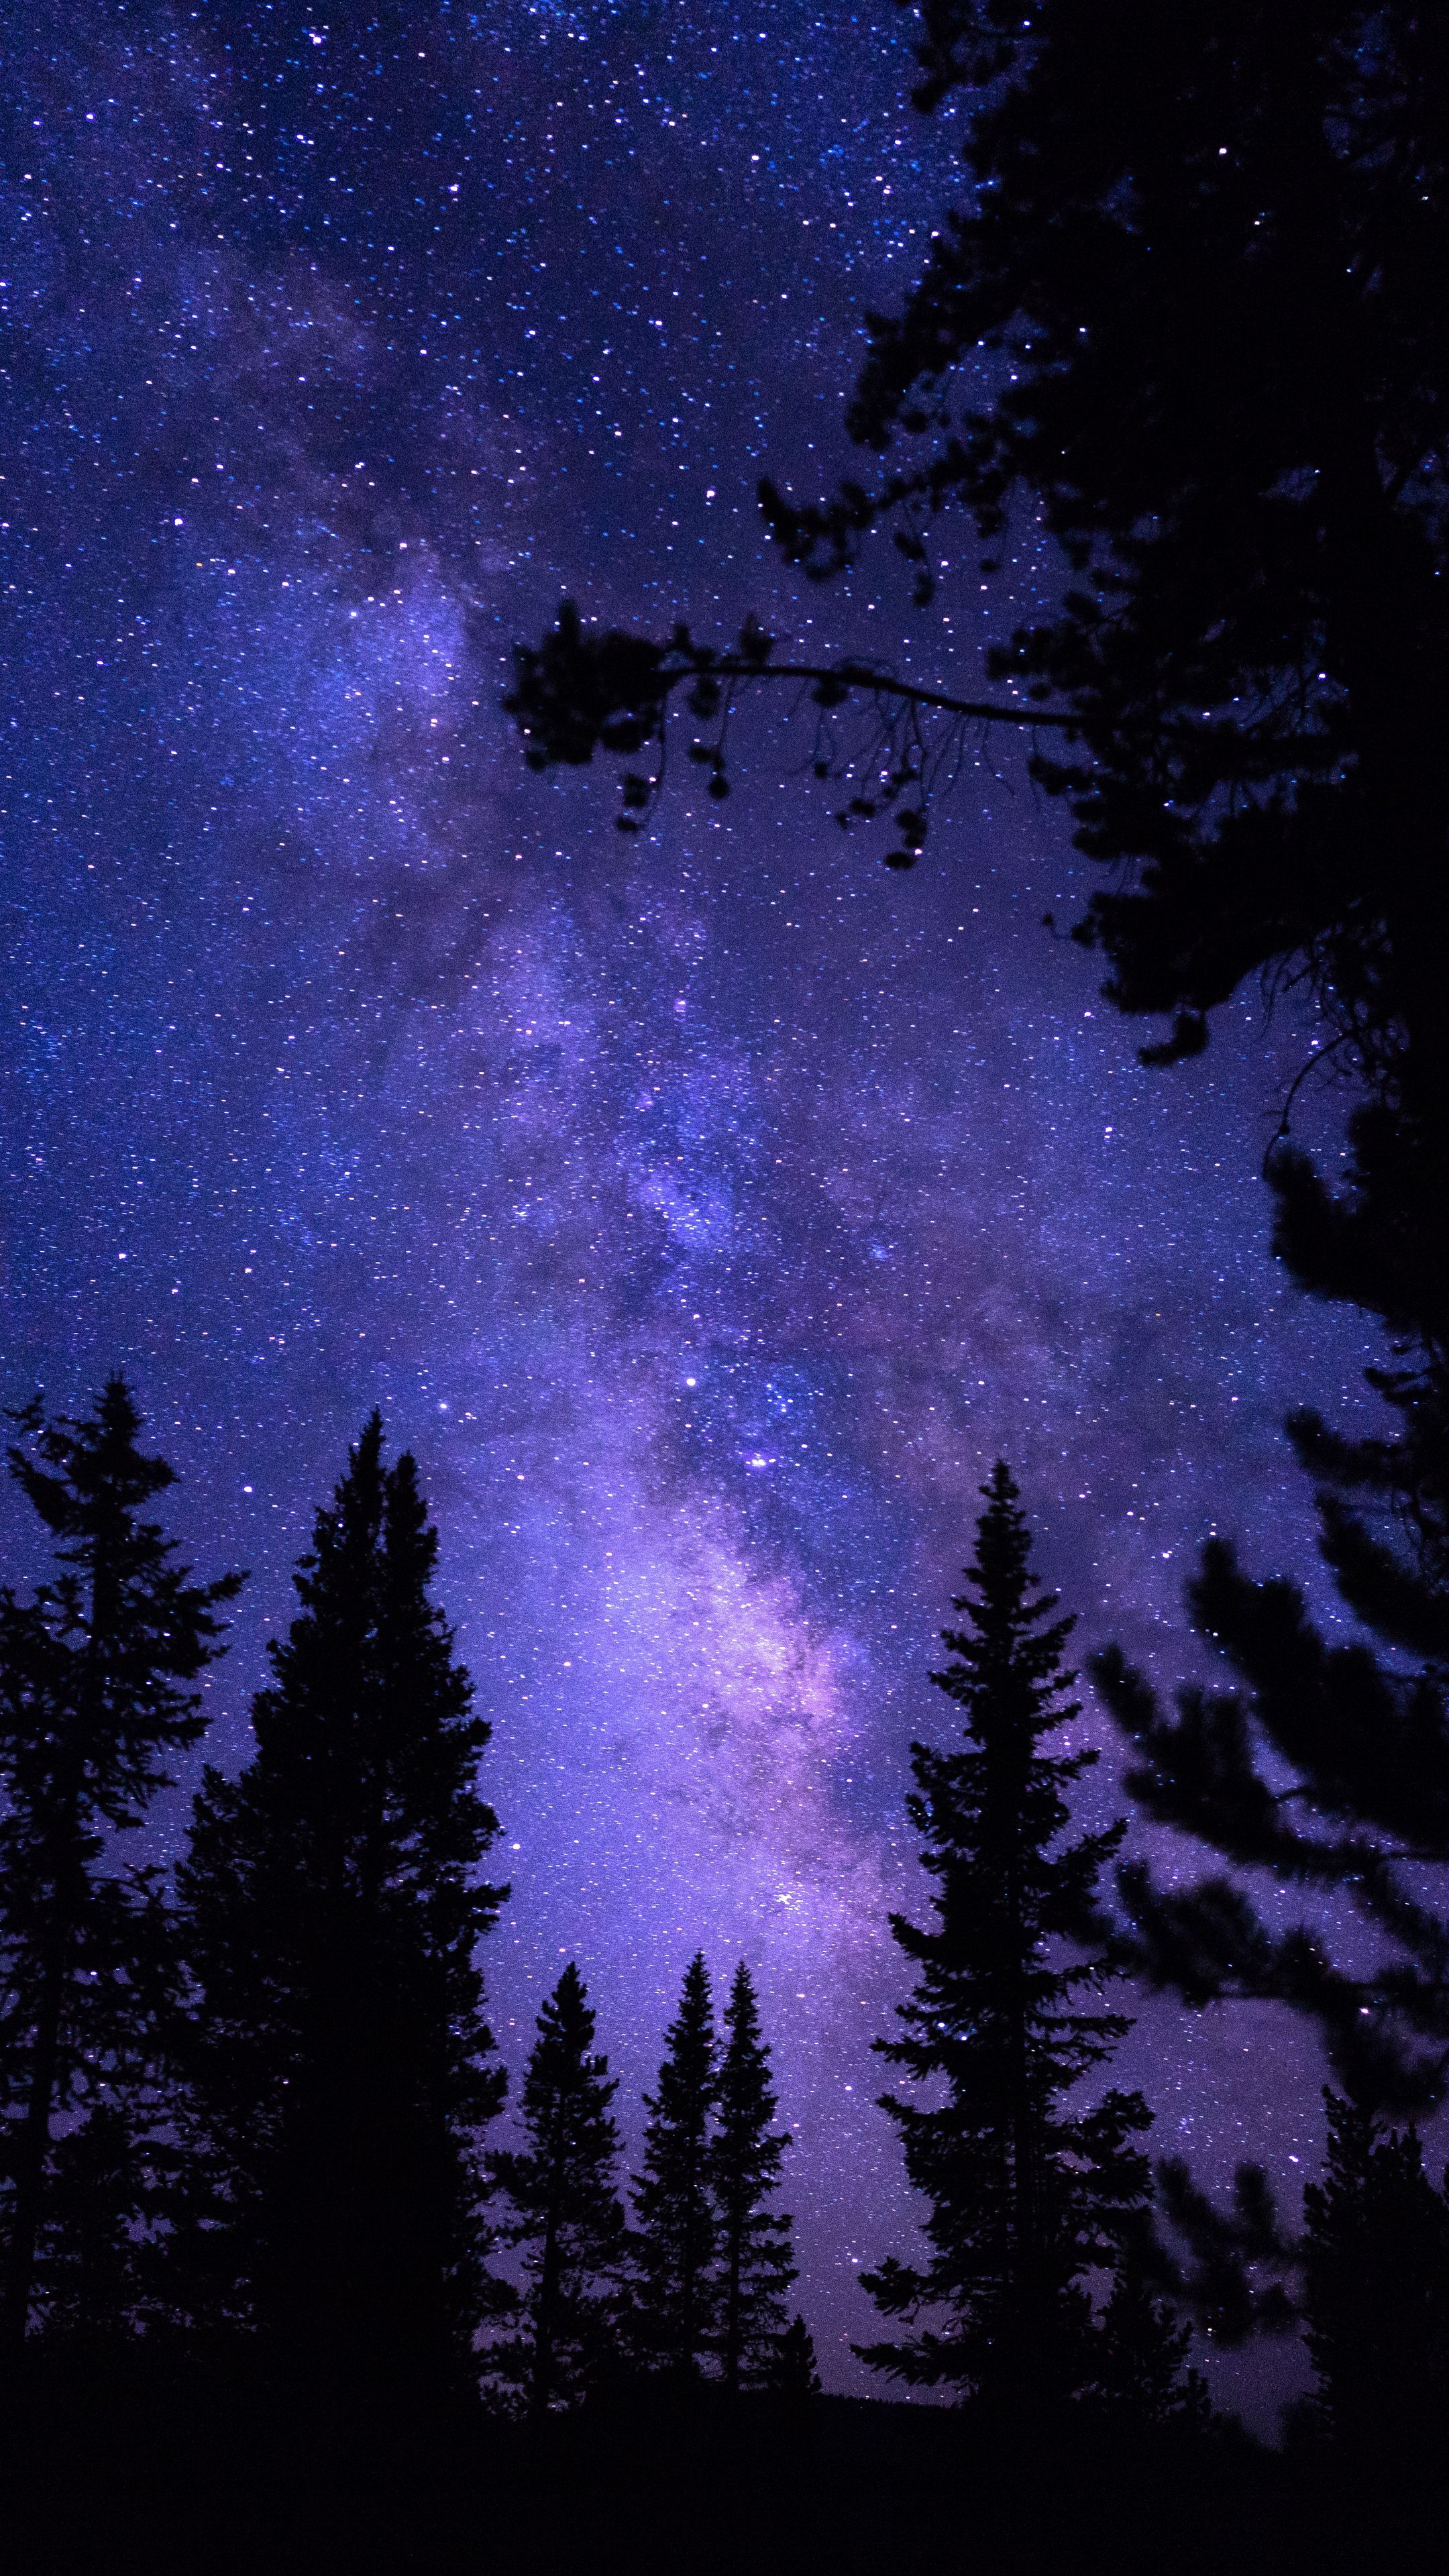 Galaxy Forest Wallpapers